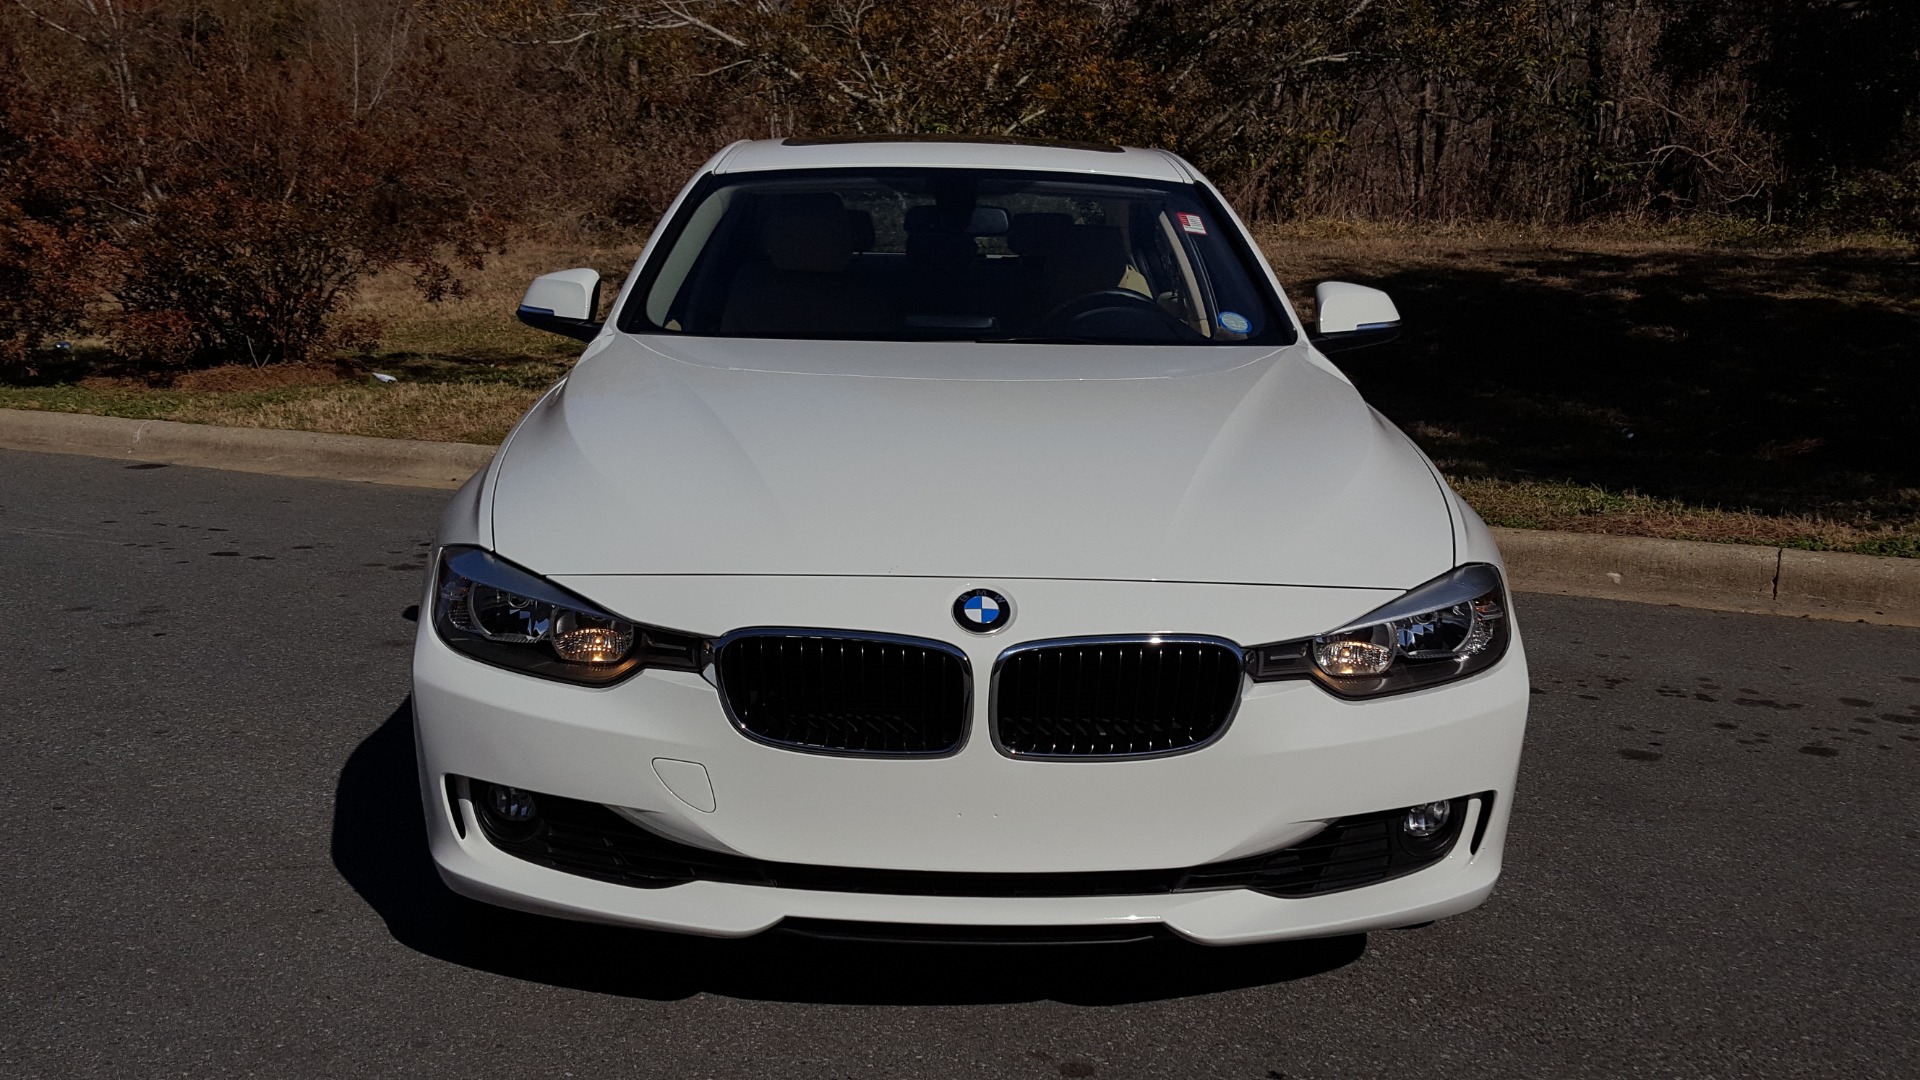 Used 2015 BMW 3 SERIES 328I SEDAN / SUNROOF / LEATHER / 8-SPEED AUTO / RWD for sale Sold at Formula Imports in Charlotte NC 28227 15